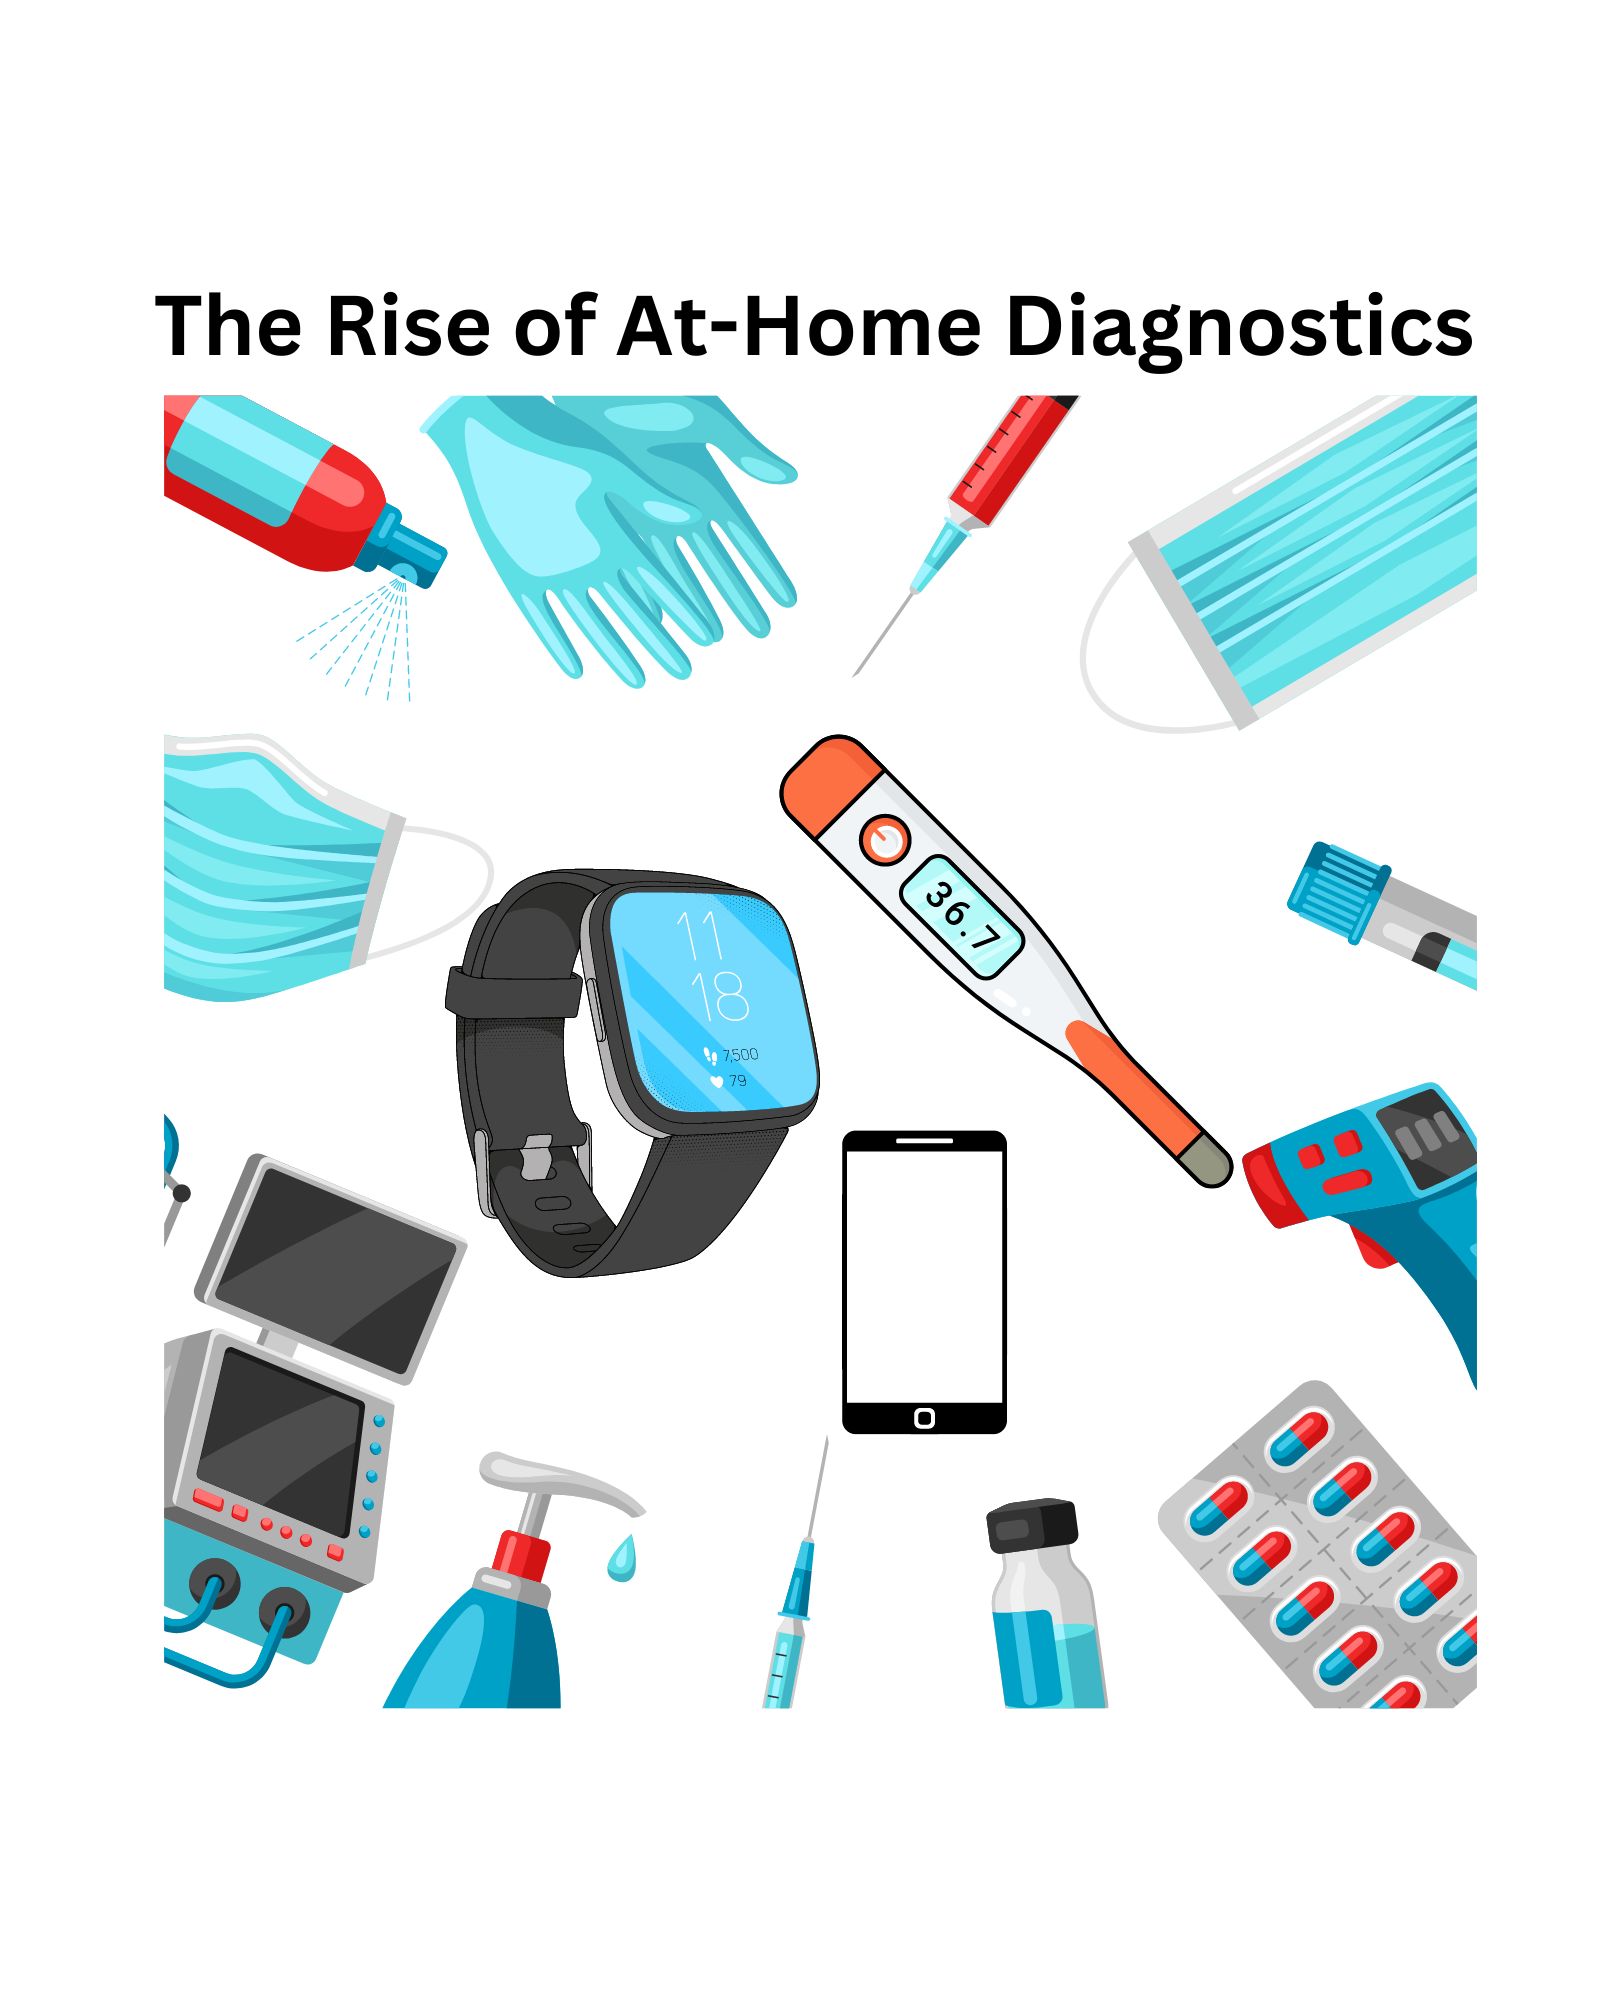 The Rise of AT-Home Diagnostics